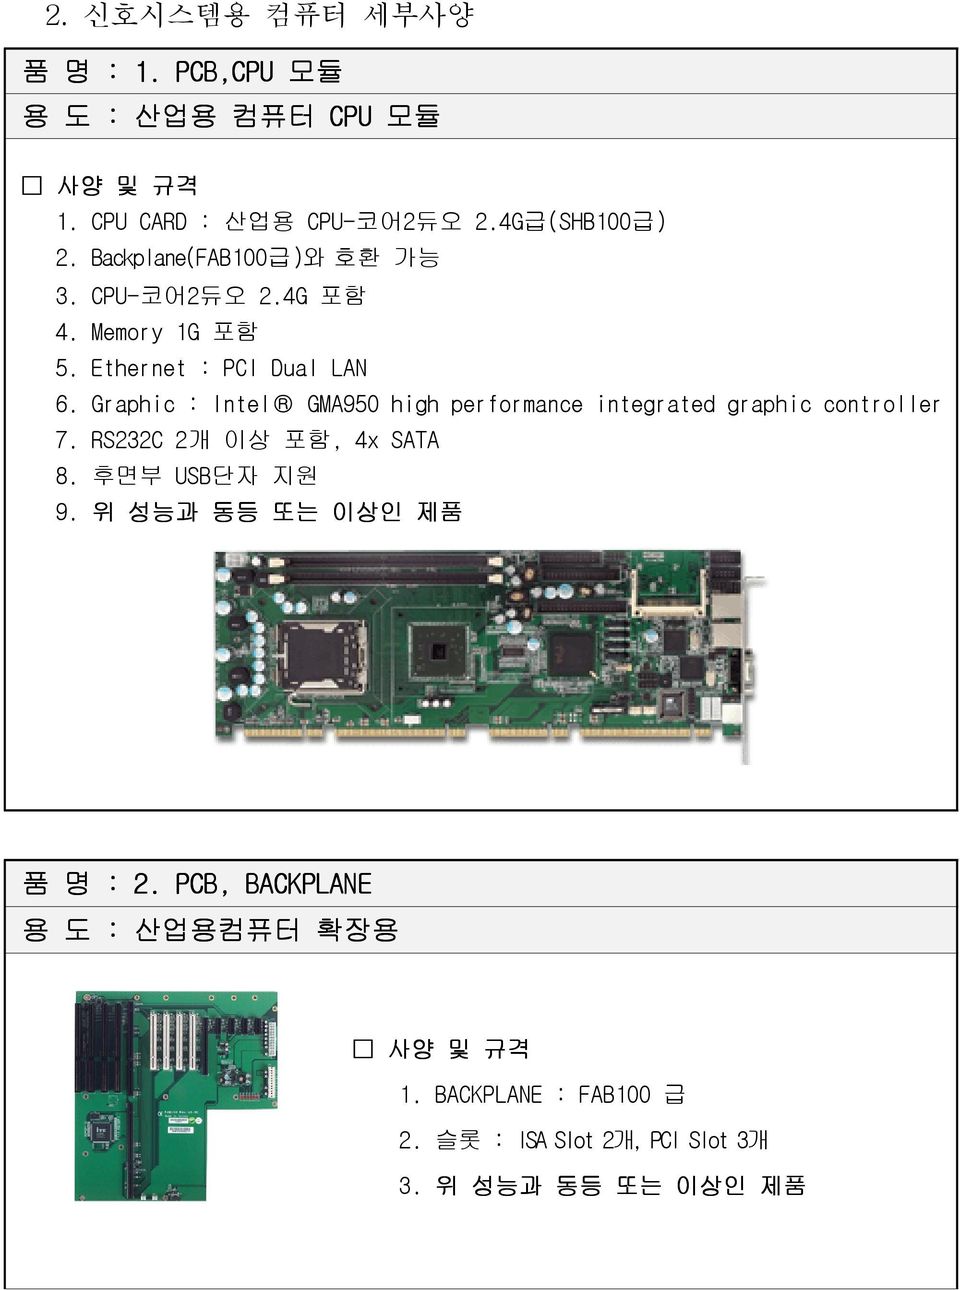 Graphic : Intel GMA950 high performance integrated graphic controller 7. RS232C 2 개 이상 포함, 4x SATA 8.